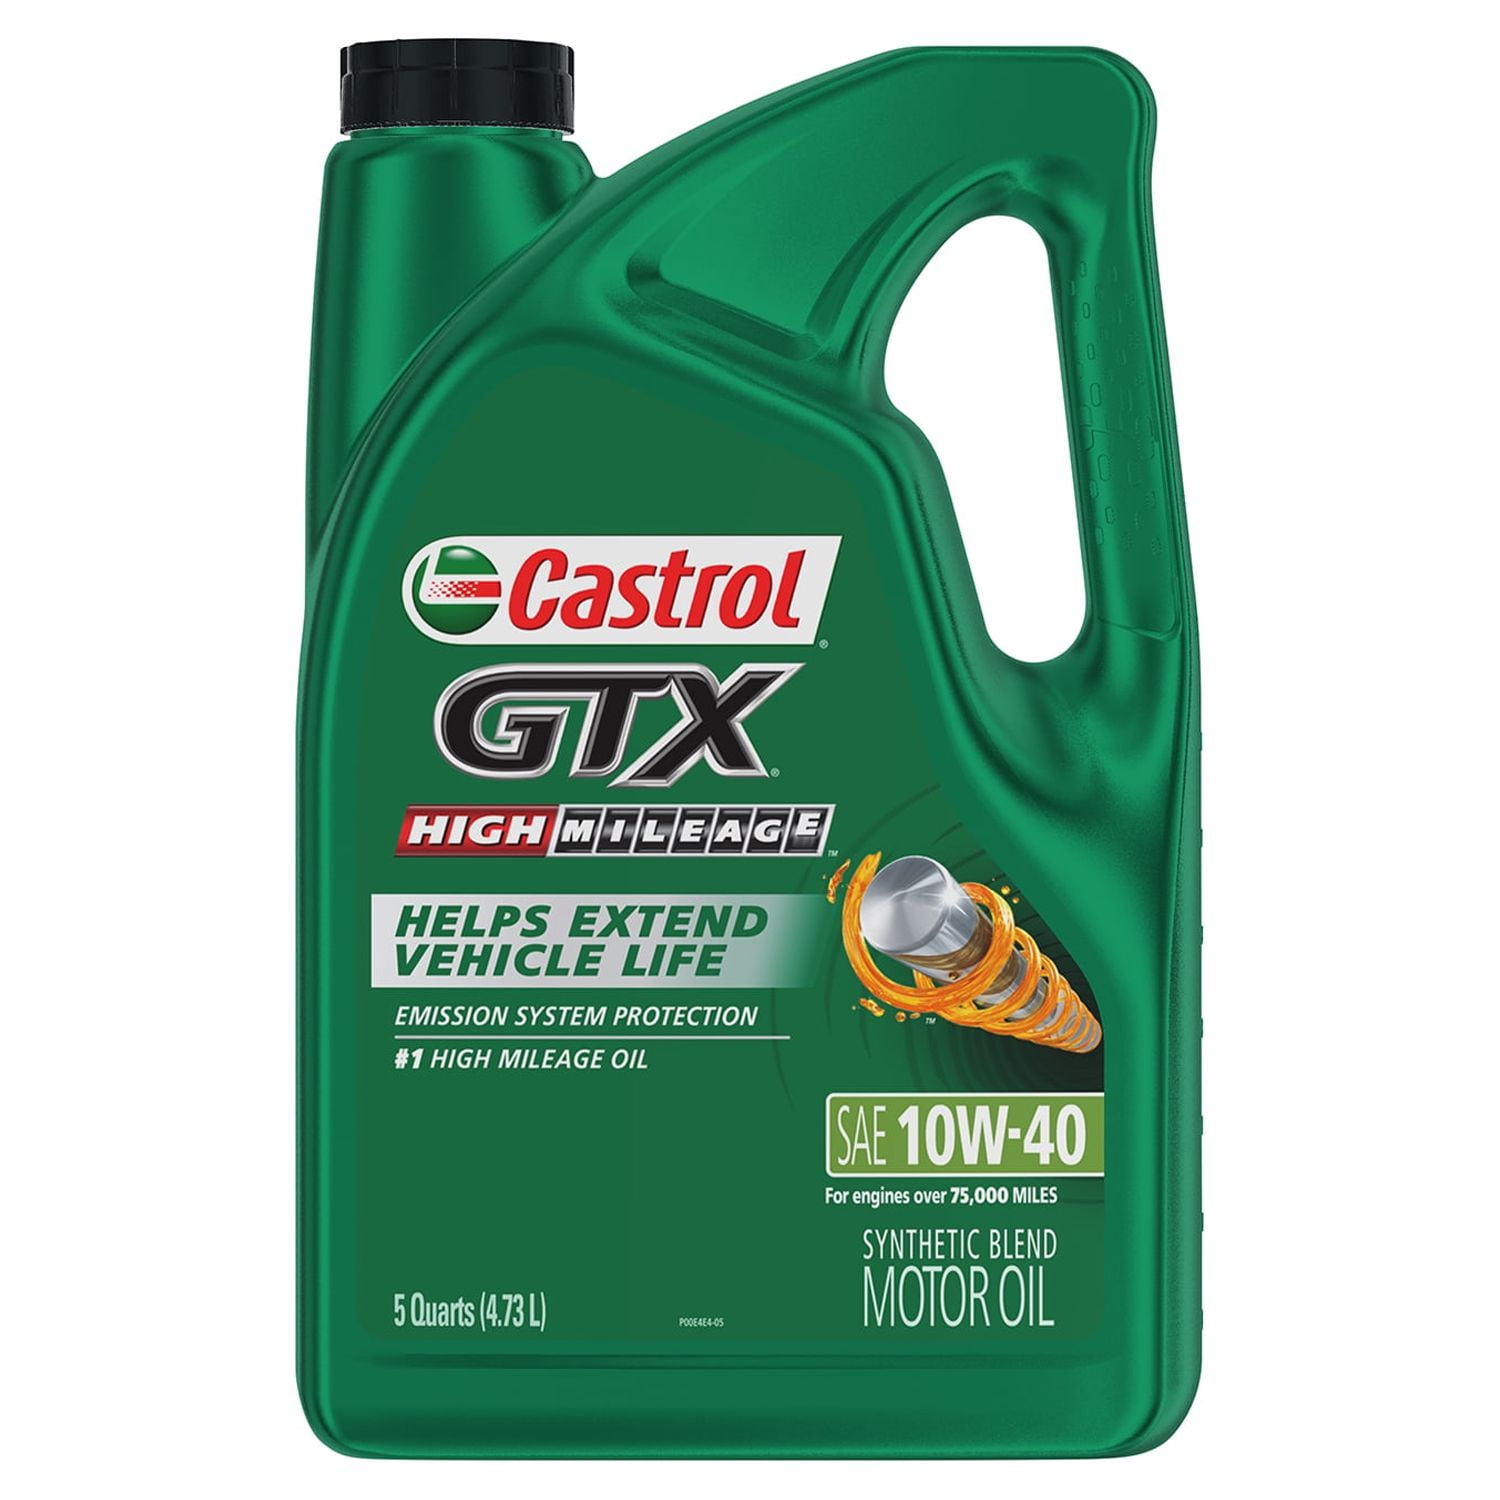 Castrol Actevo 4T 10W-40 Part Synthetic Motorcycle Oil, 1 Quart